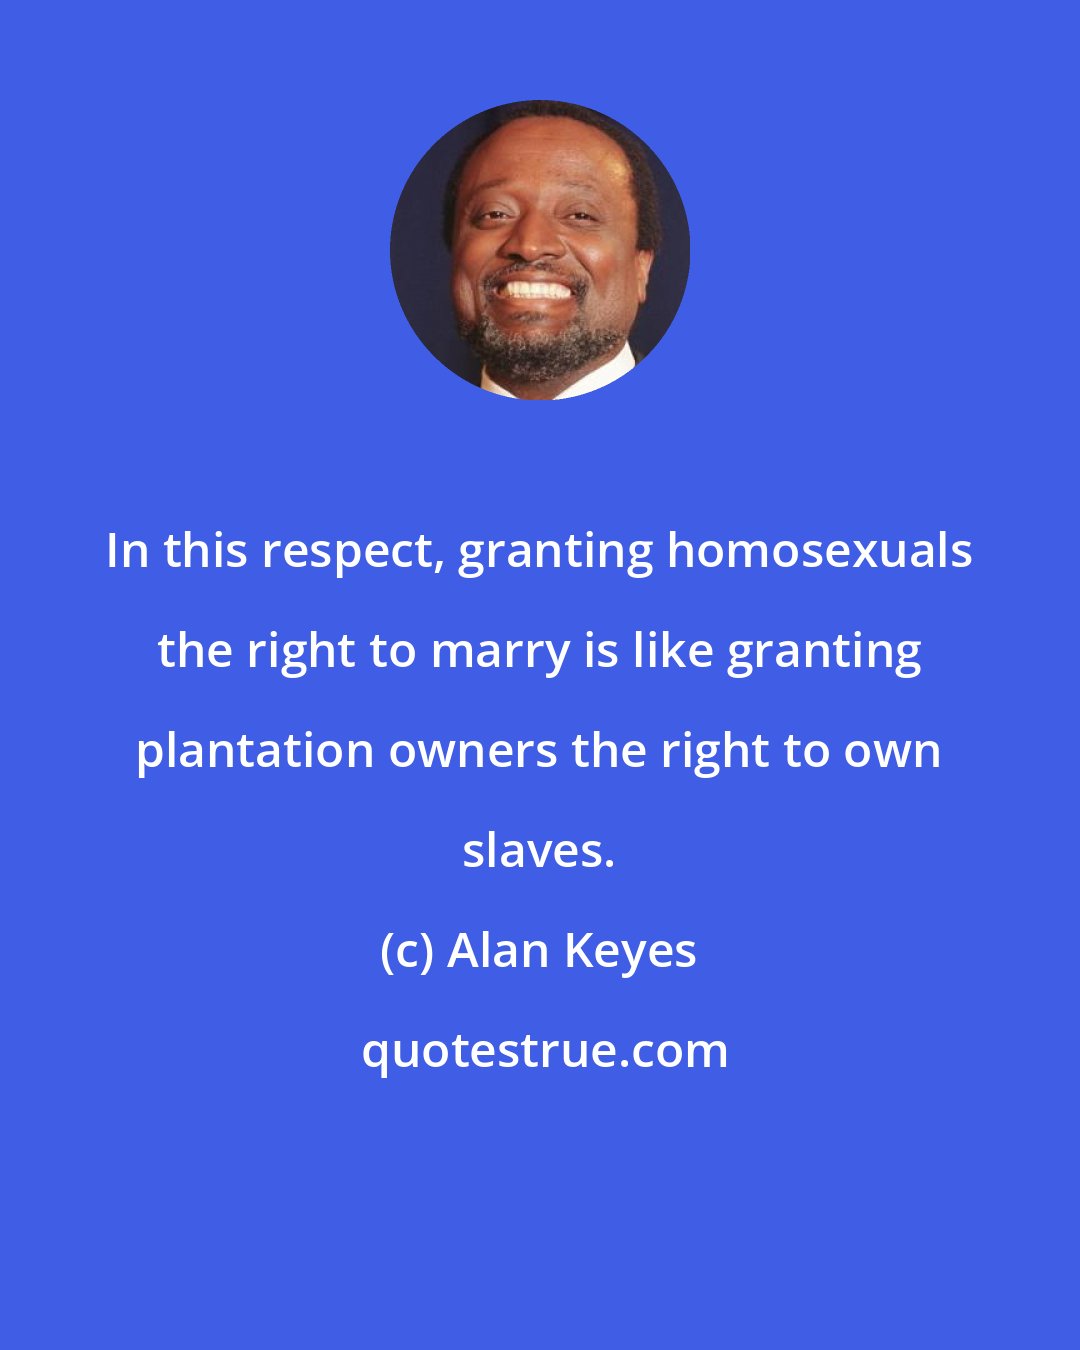 Alan Keyes: In this respect, granting homosexuals the right to marry is like granting plantation owners the right to own slaves.